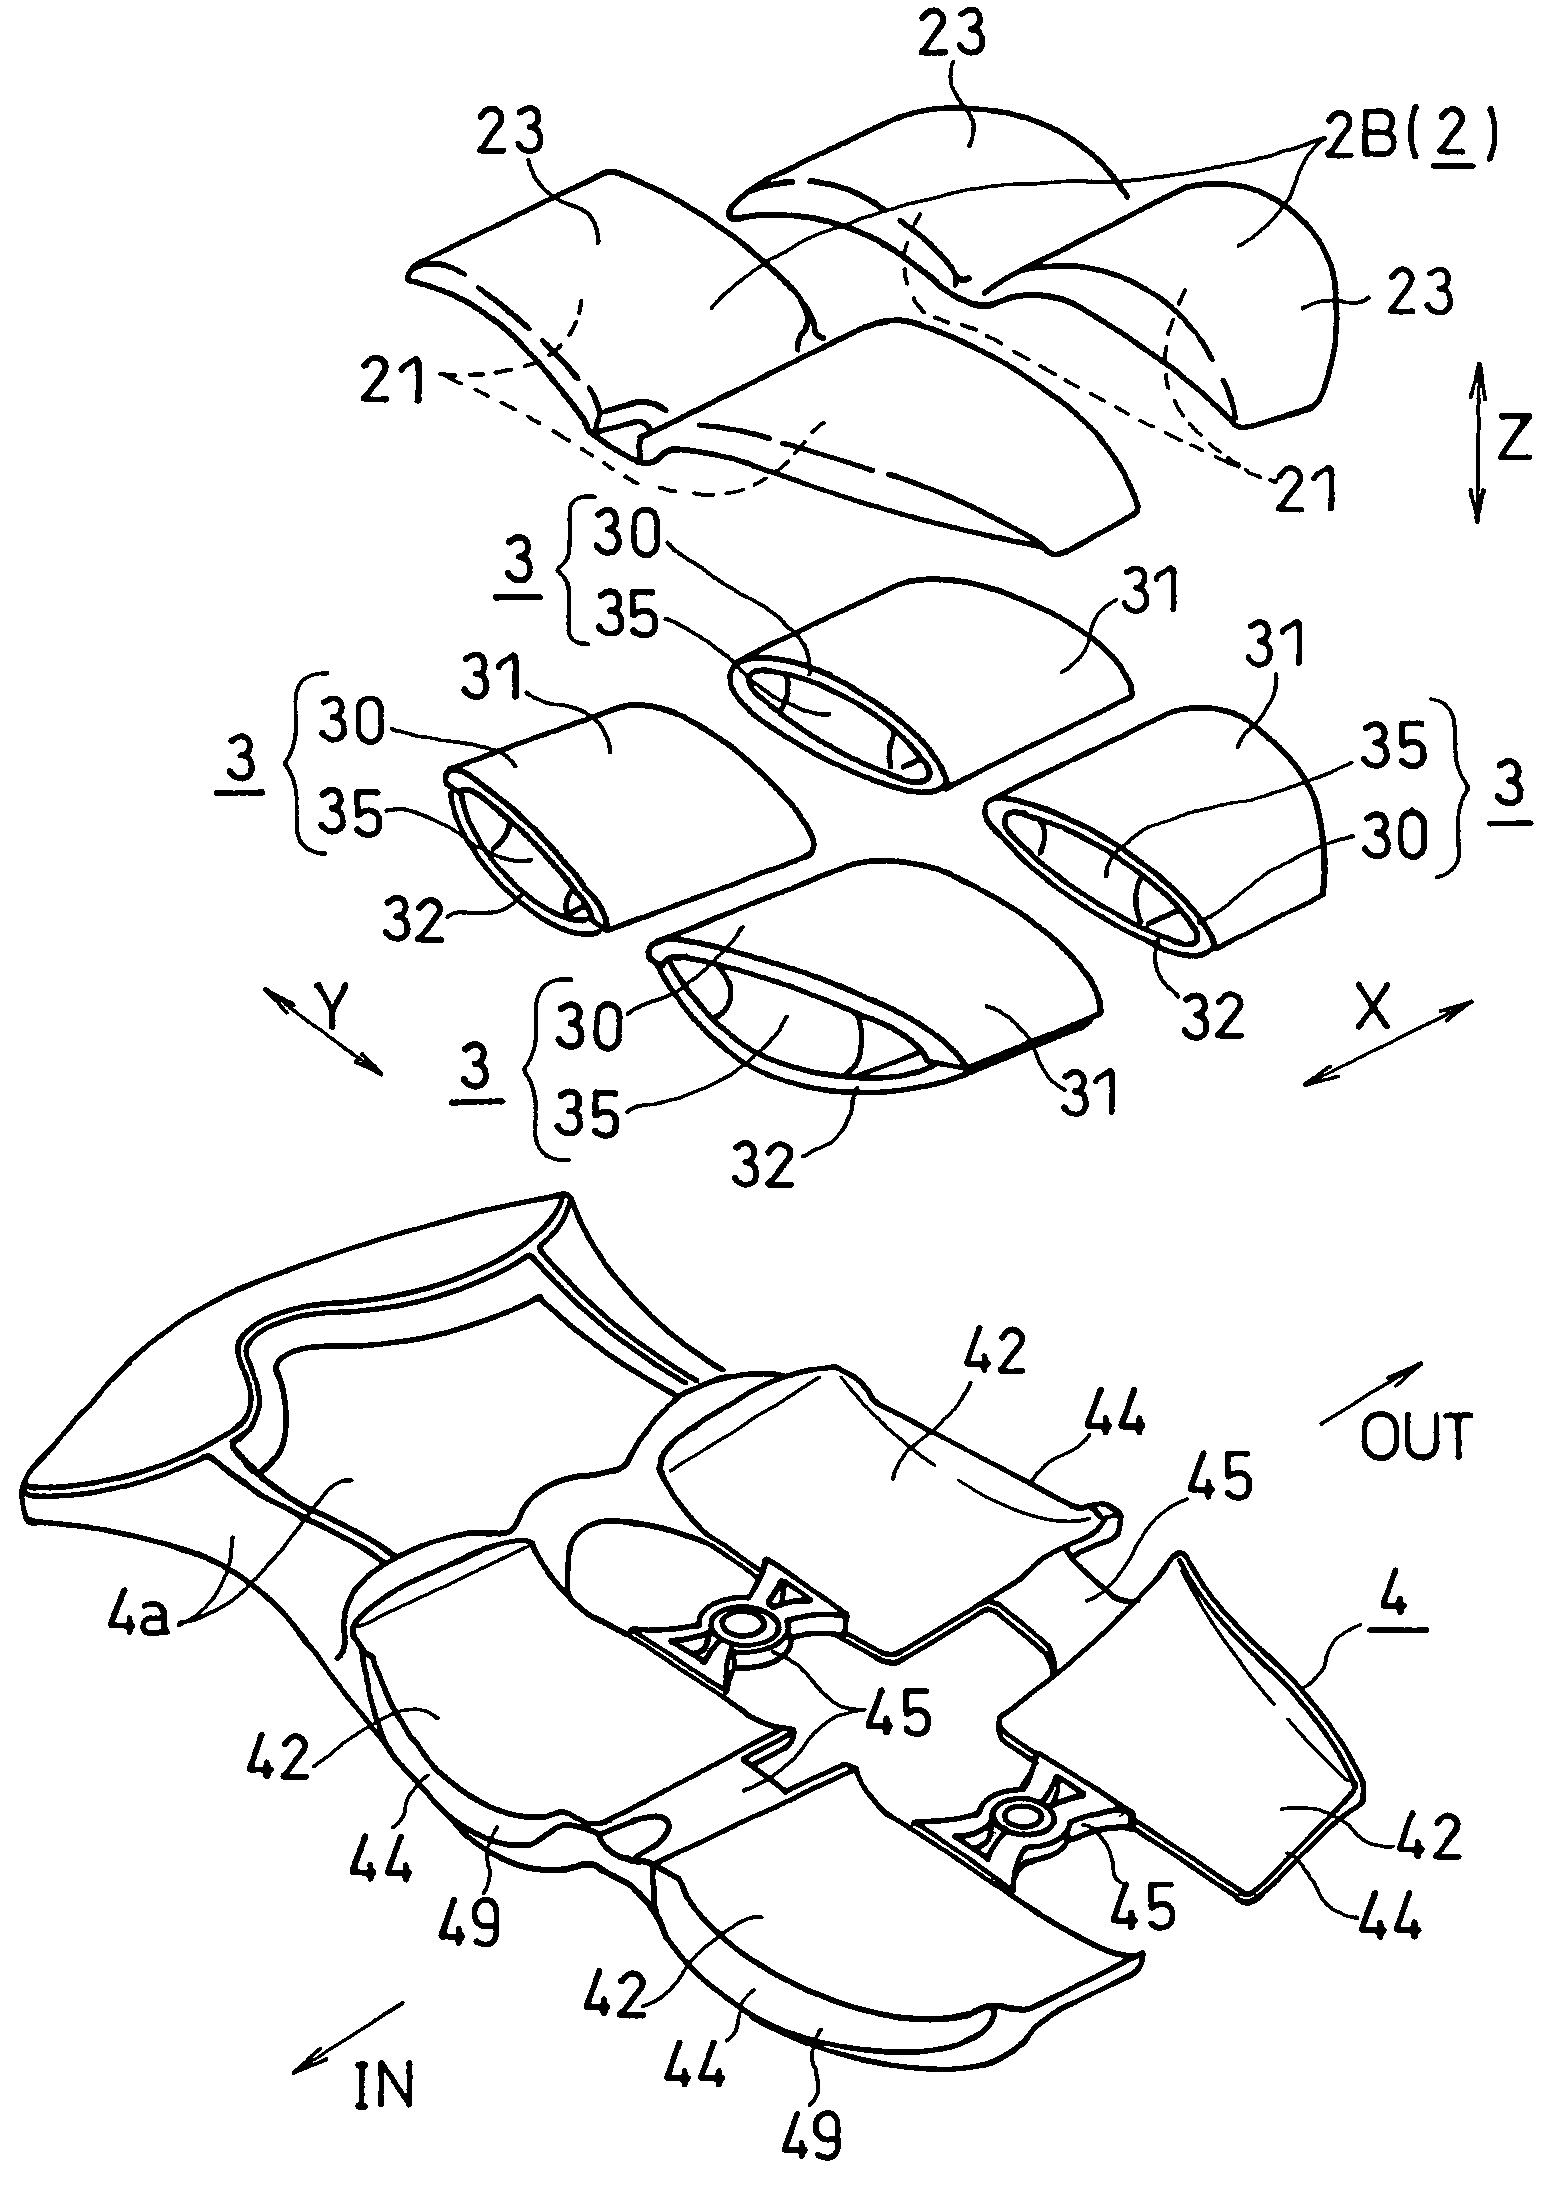 Shock absorbing device for shoe sole